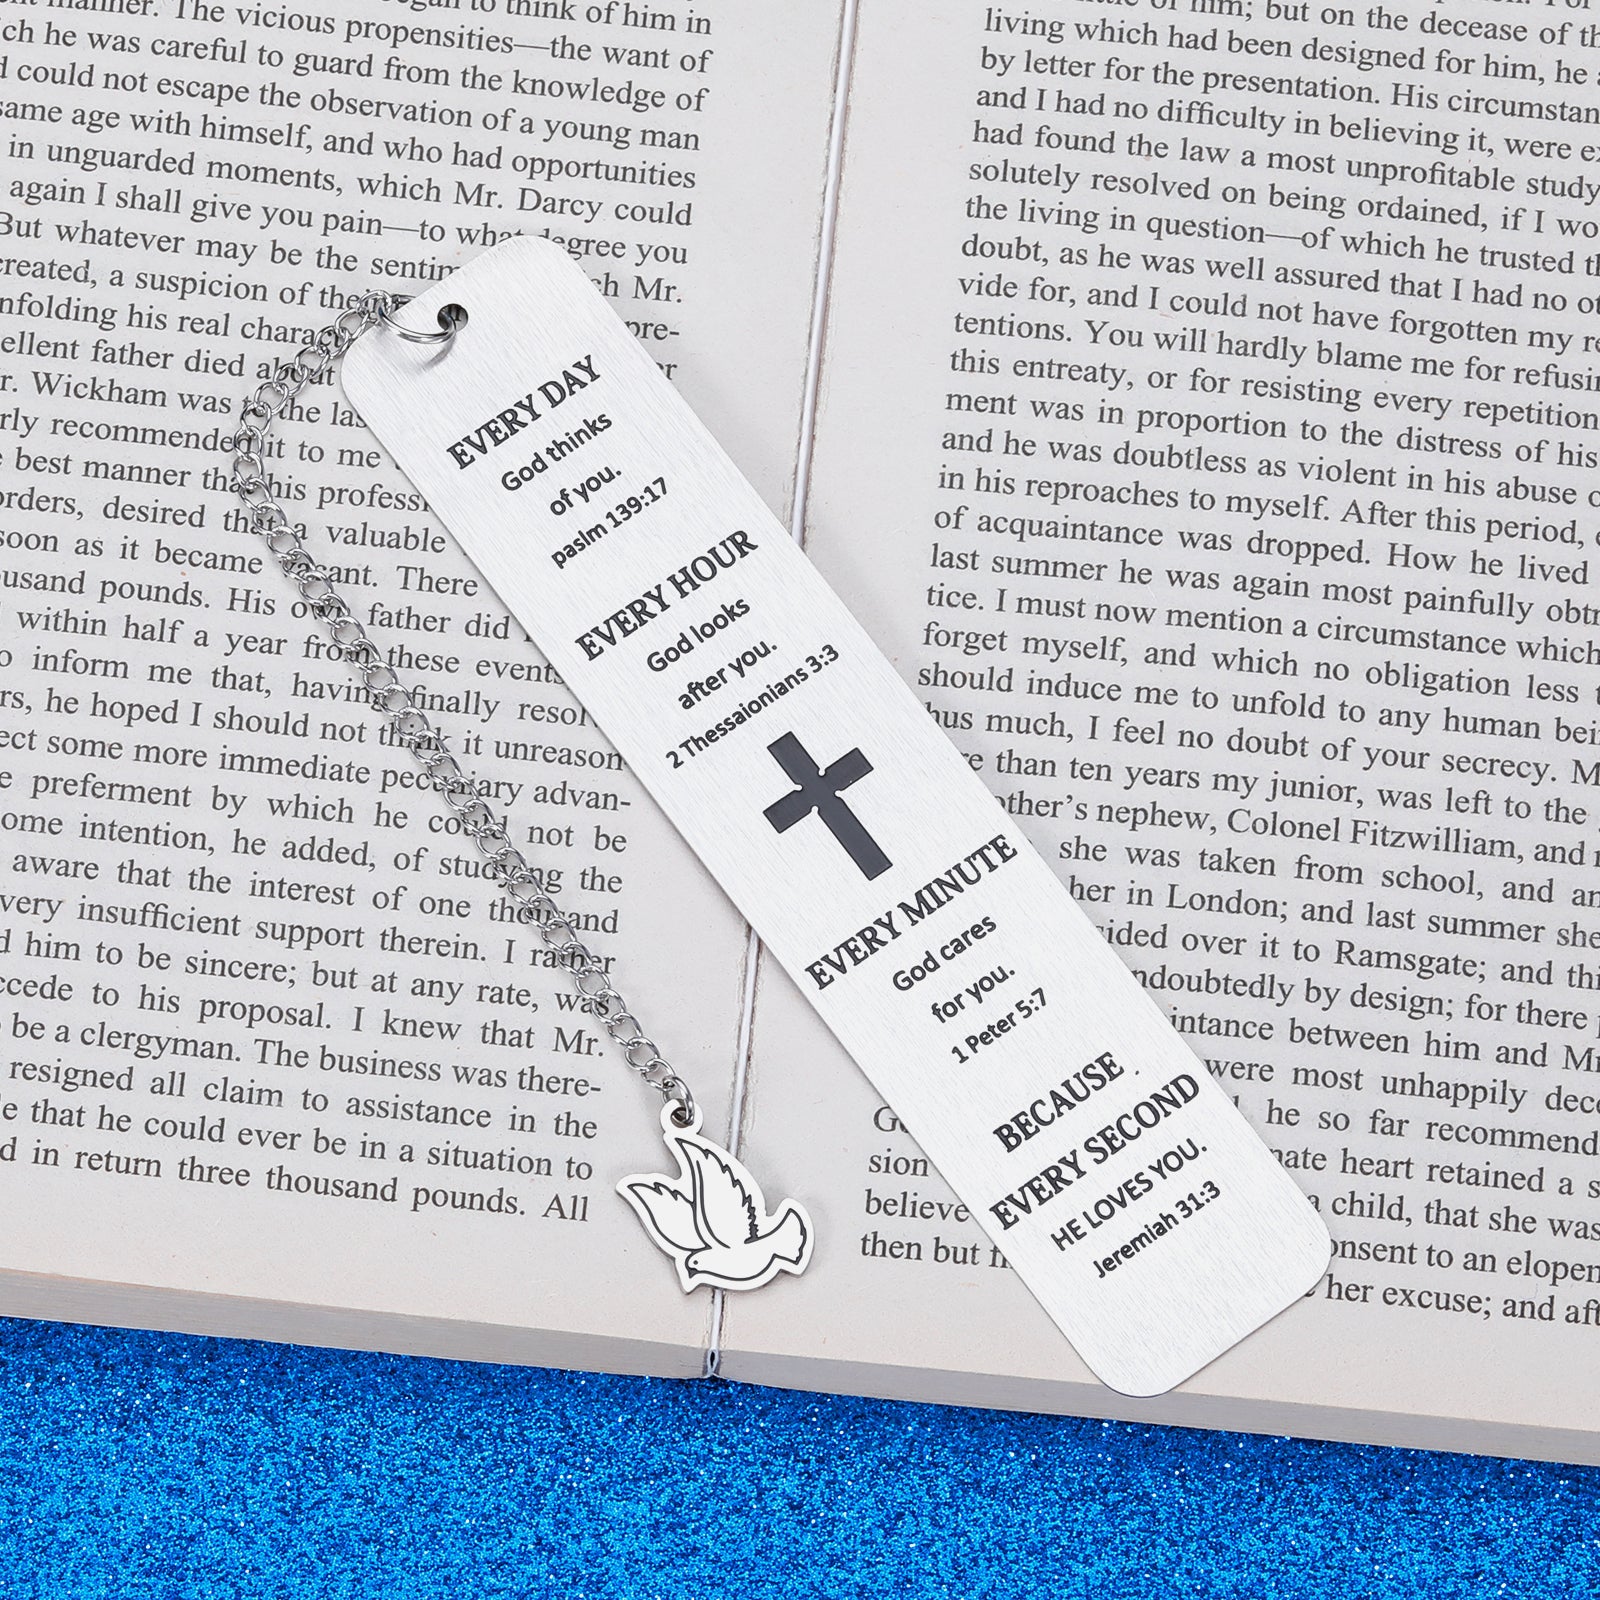 Religious Gifts for Women Christian Spiritual gifts for her Baptism Gifts  for Girl Kids Teens Son Graduation Gifts Bible Bookmark Blessing Gifts for